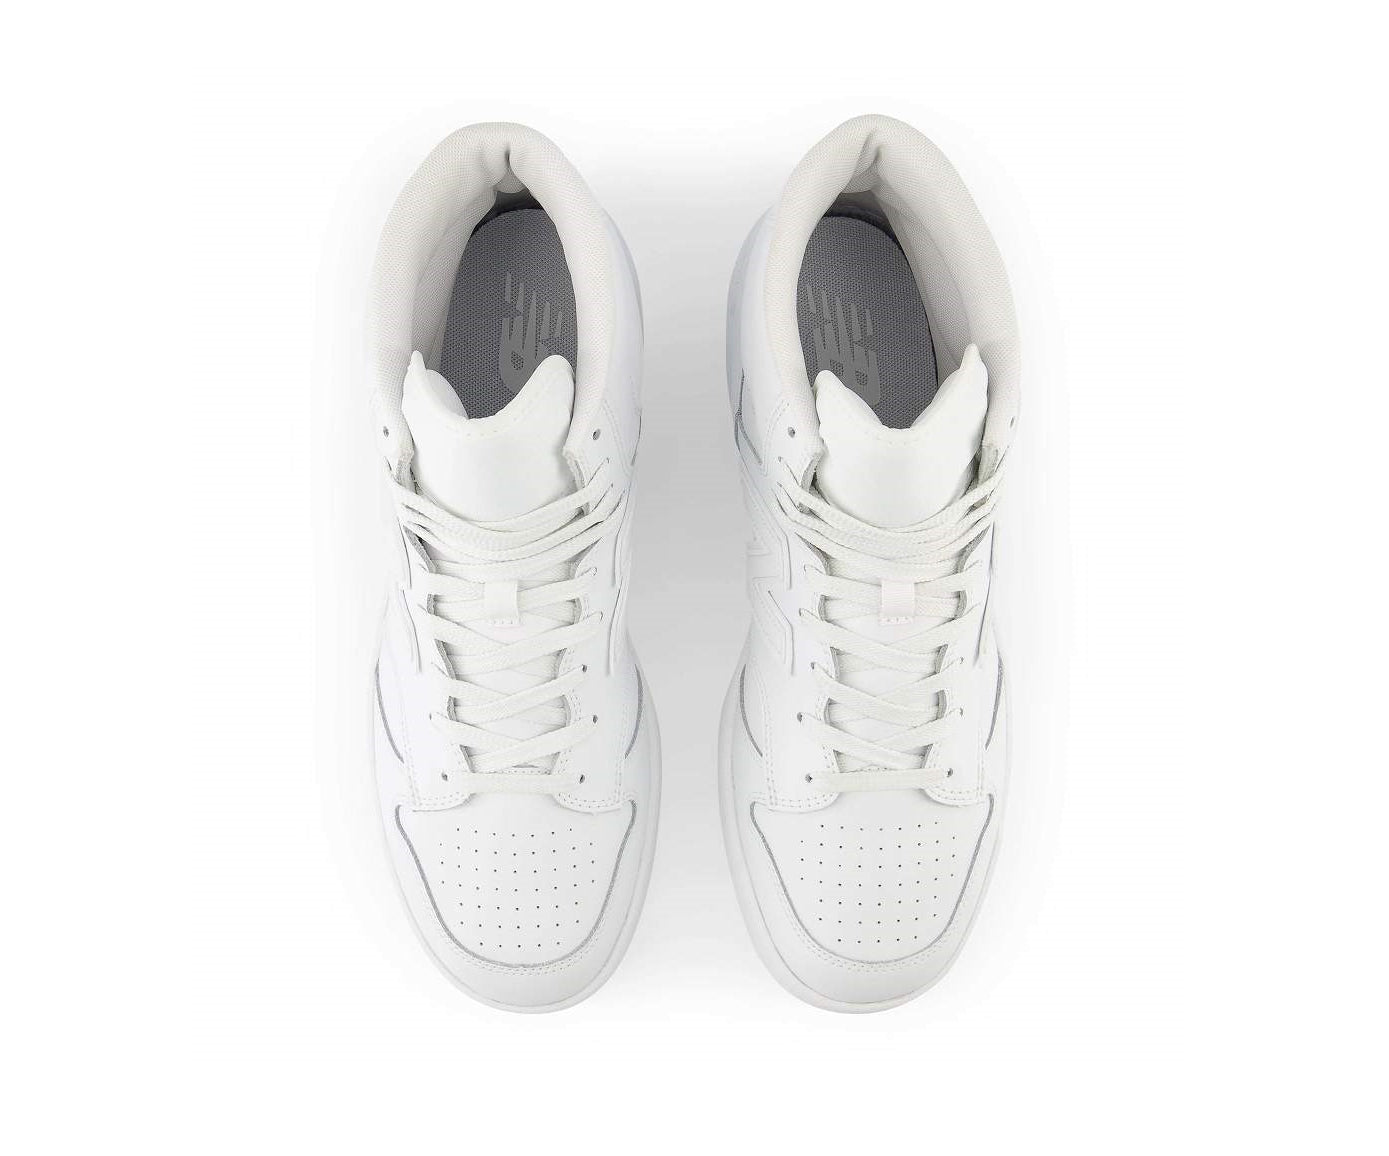 A monochrome white leather high-cut basketball sneaker from New Balance.